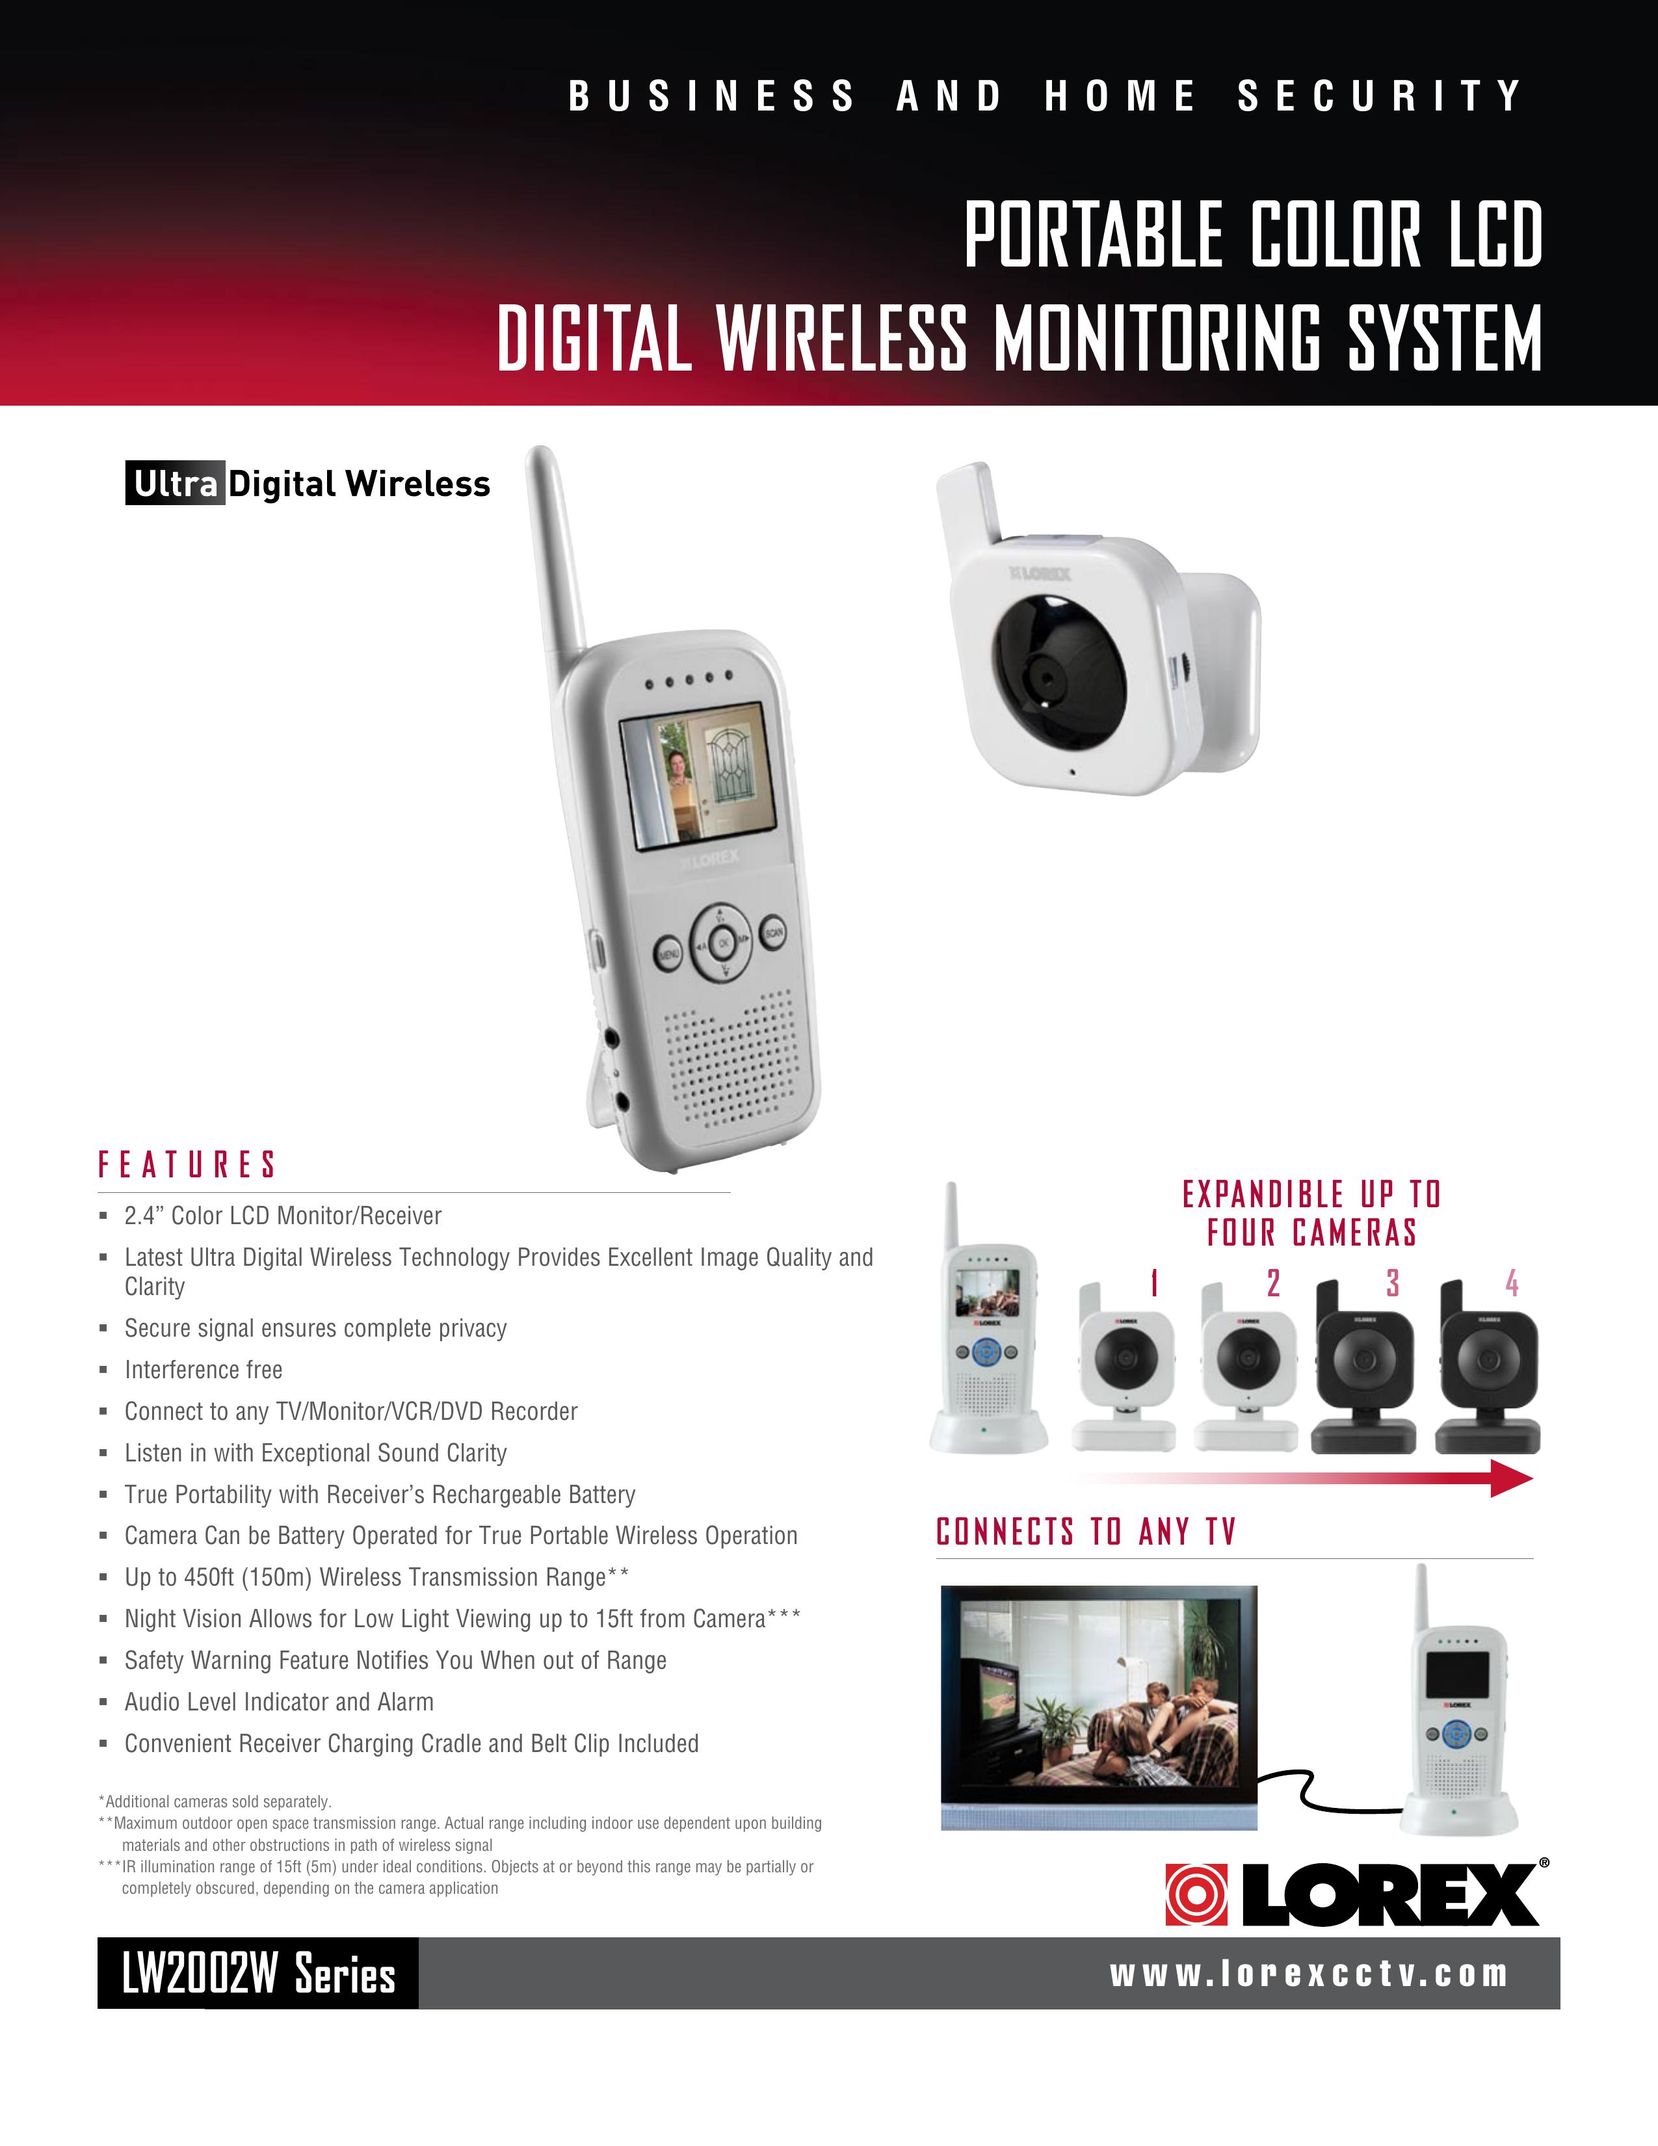 LOREX Technology LW2002W Series Home Security System User Manual